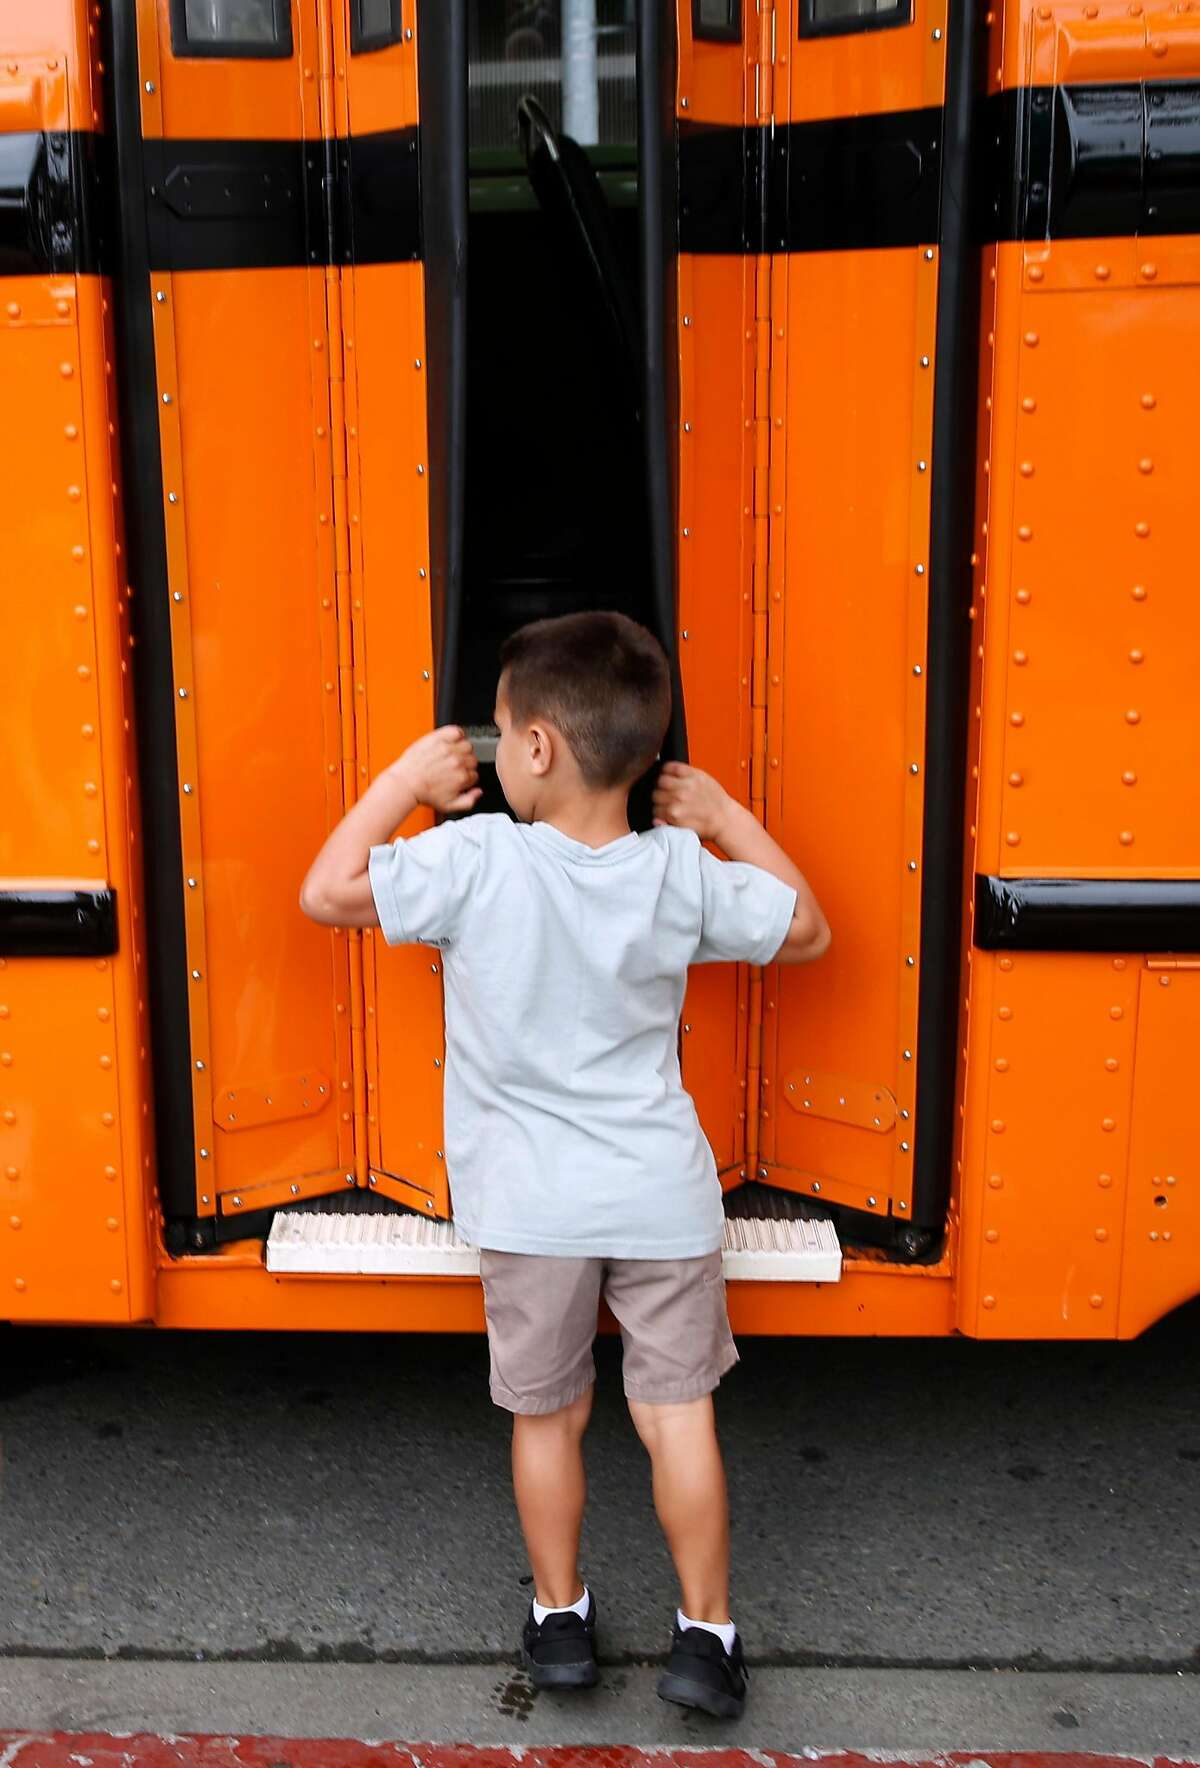 Ryder Fitzpatrick, 4, peeks inside a 1938 White Motor Company Muni bus displayed at the Muni Heritage Weekend celebration of historic streetcars and buses in San Francisco, Calif. on Saturday, Sept. 7, 2019.